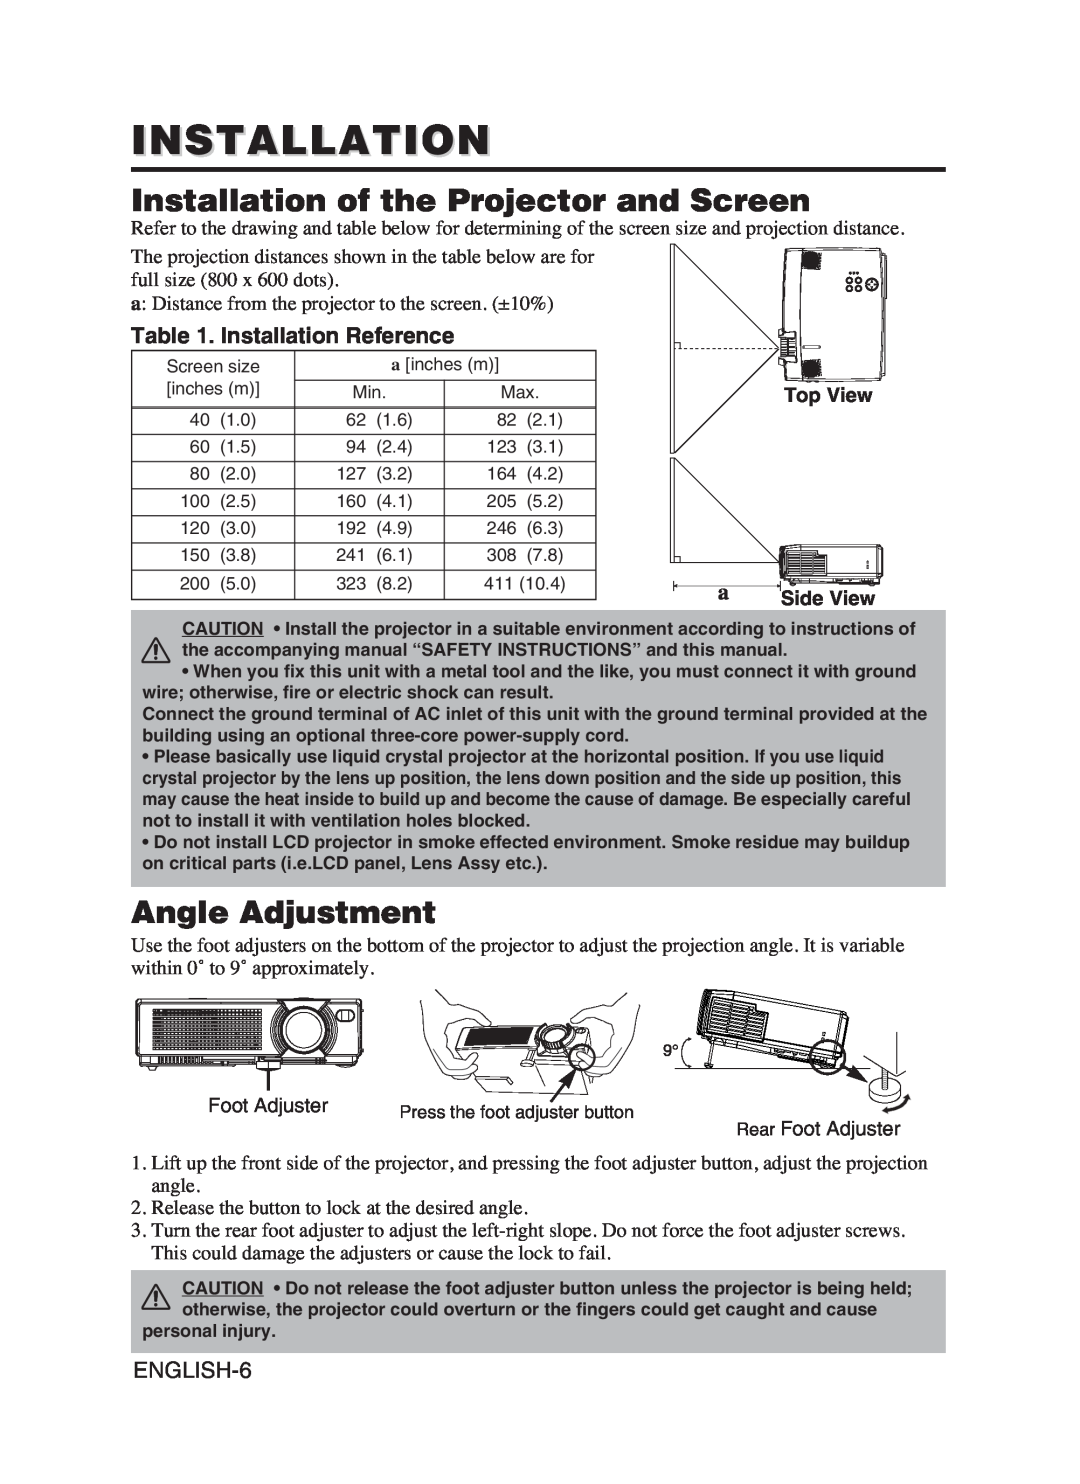 Hitachi CP-S370W user manual Installation of the Projector and Screen, Angle Adjustment, Installation Reference 